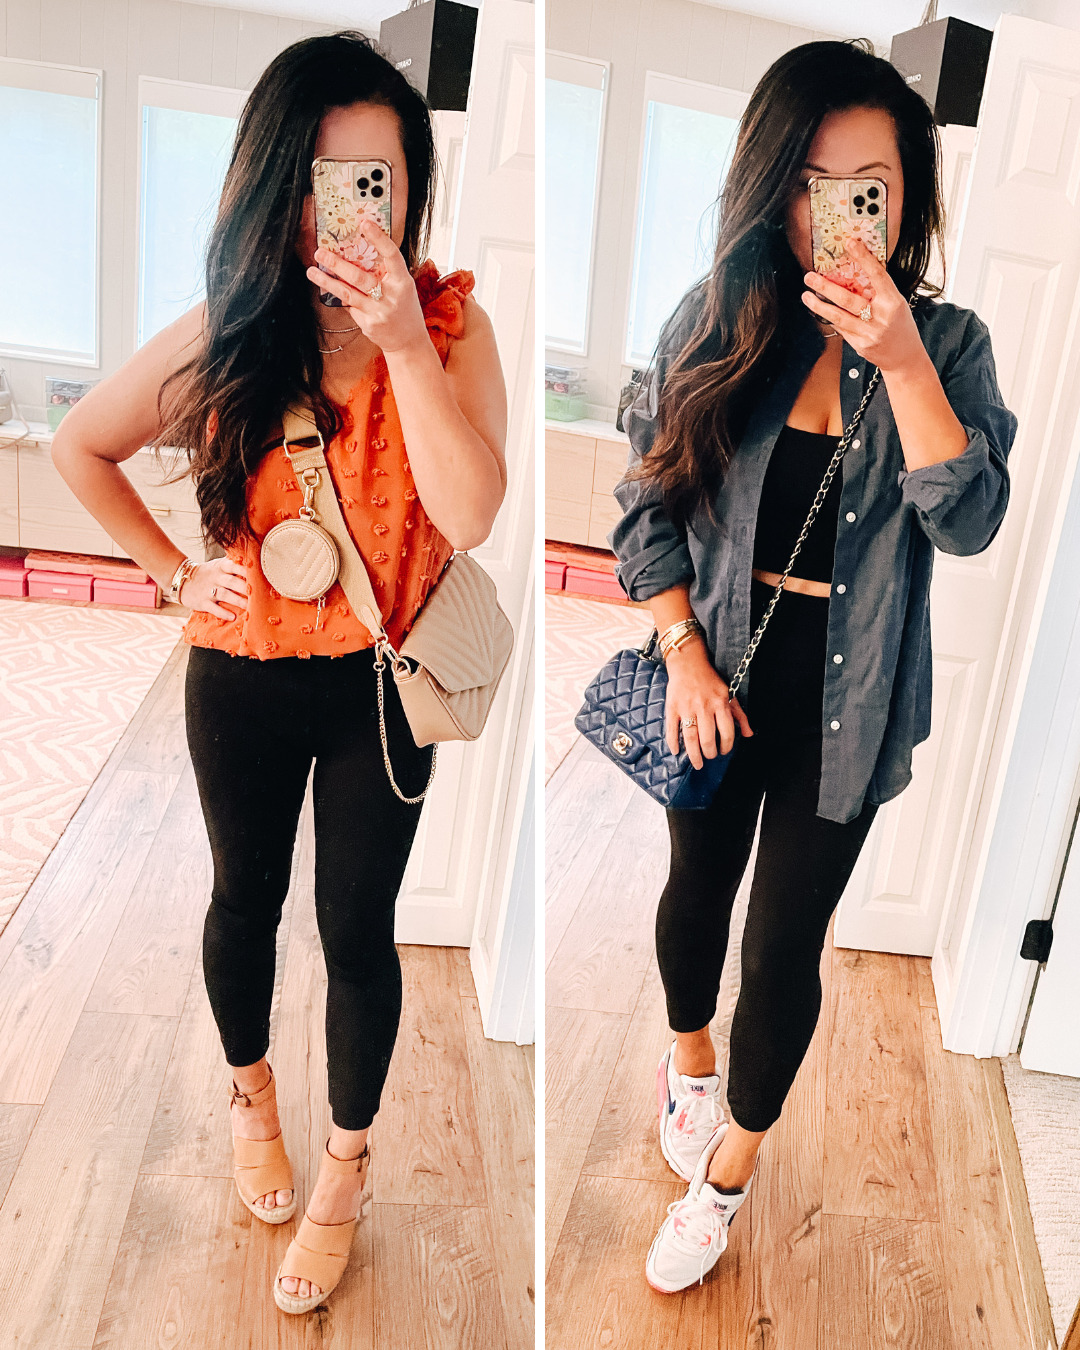 Easy summer style: Stylish tops wear with leggings